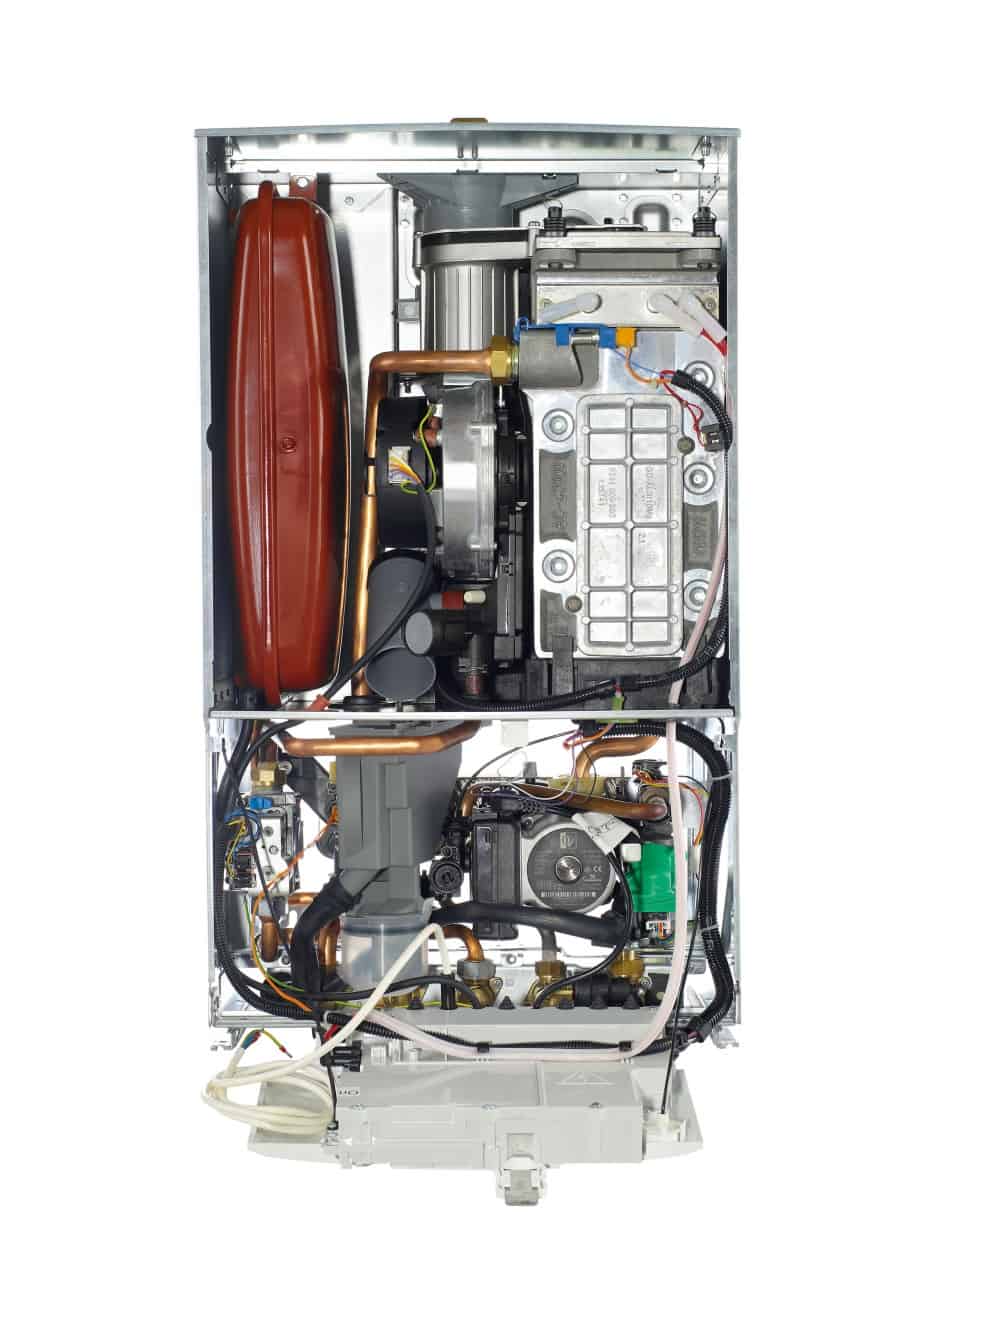 What Is a Combi Boiler?